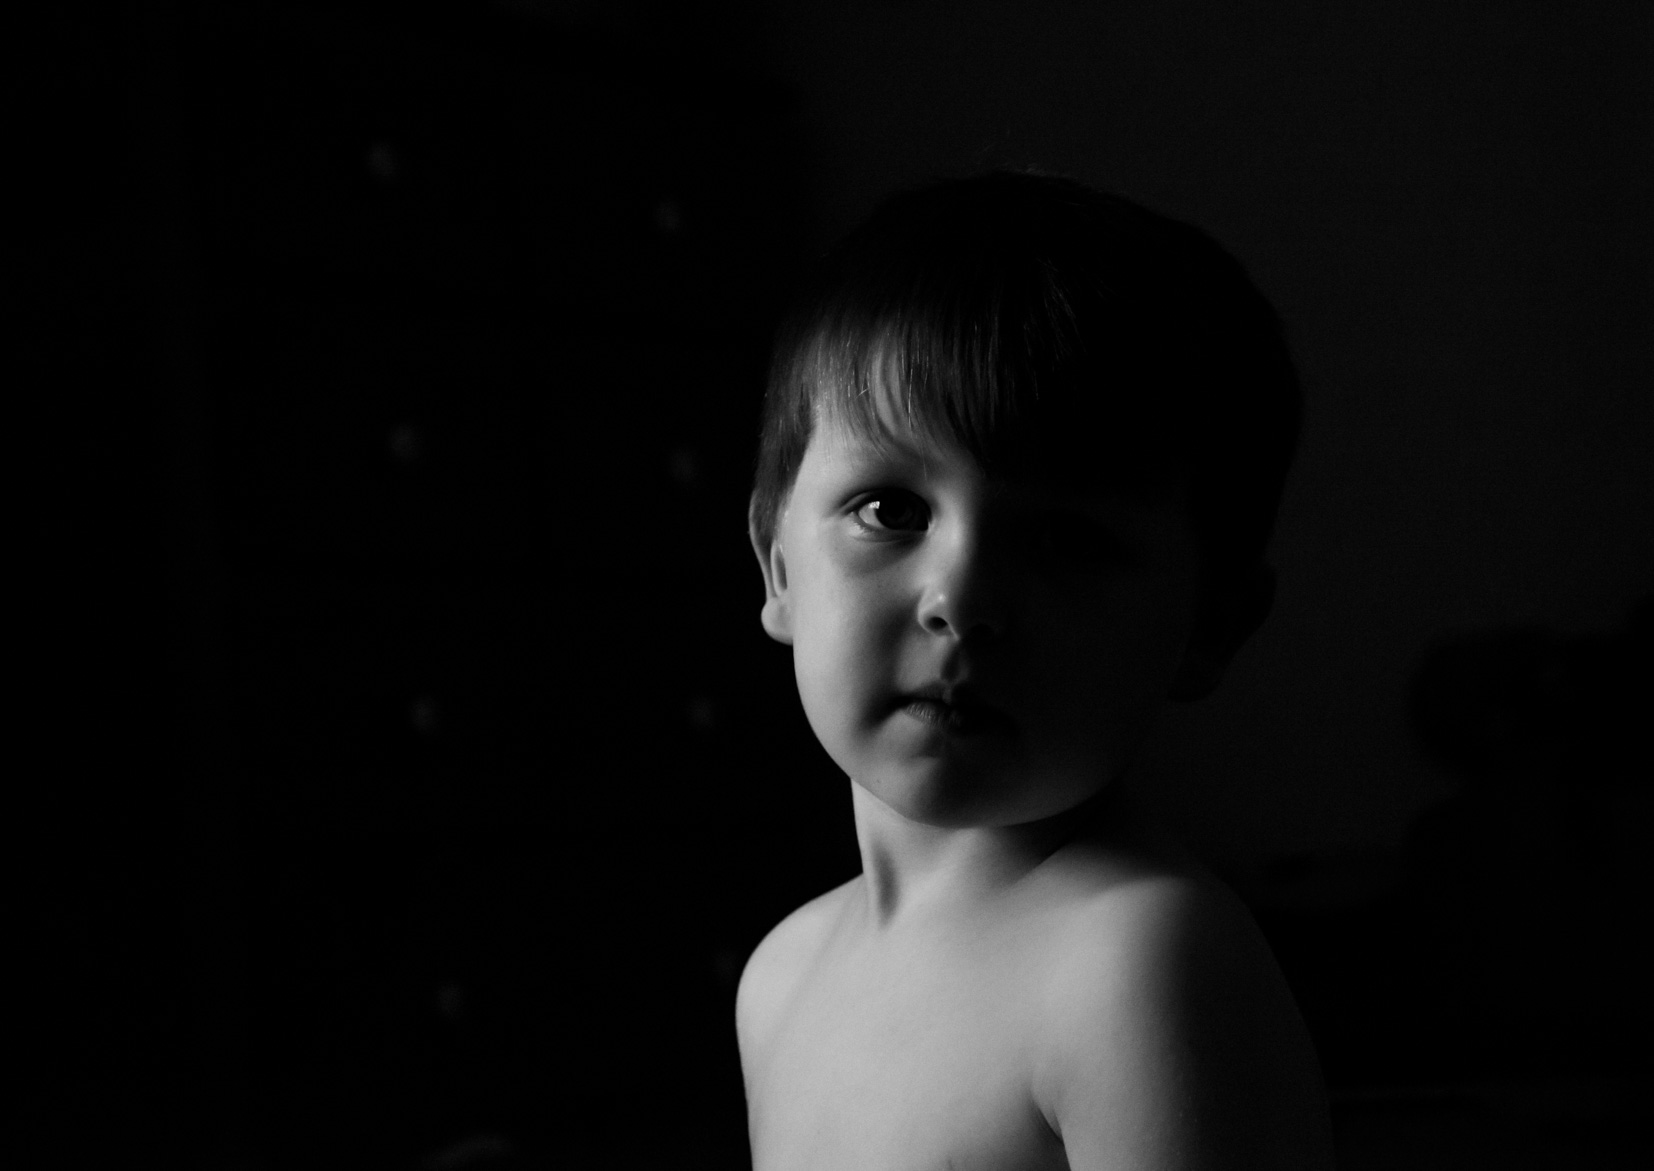 Big brother watching the little one (my oldest baby) -  by Holly Naughton Photography